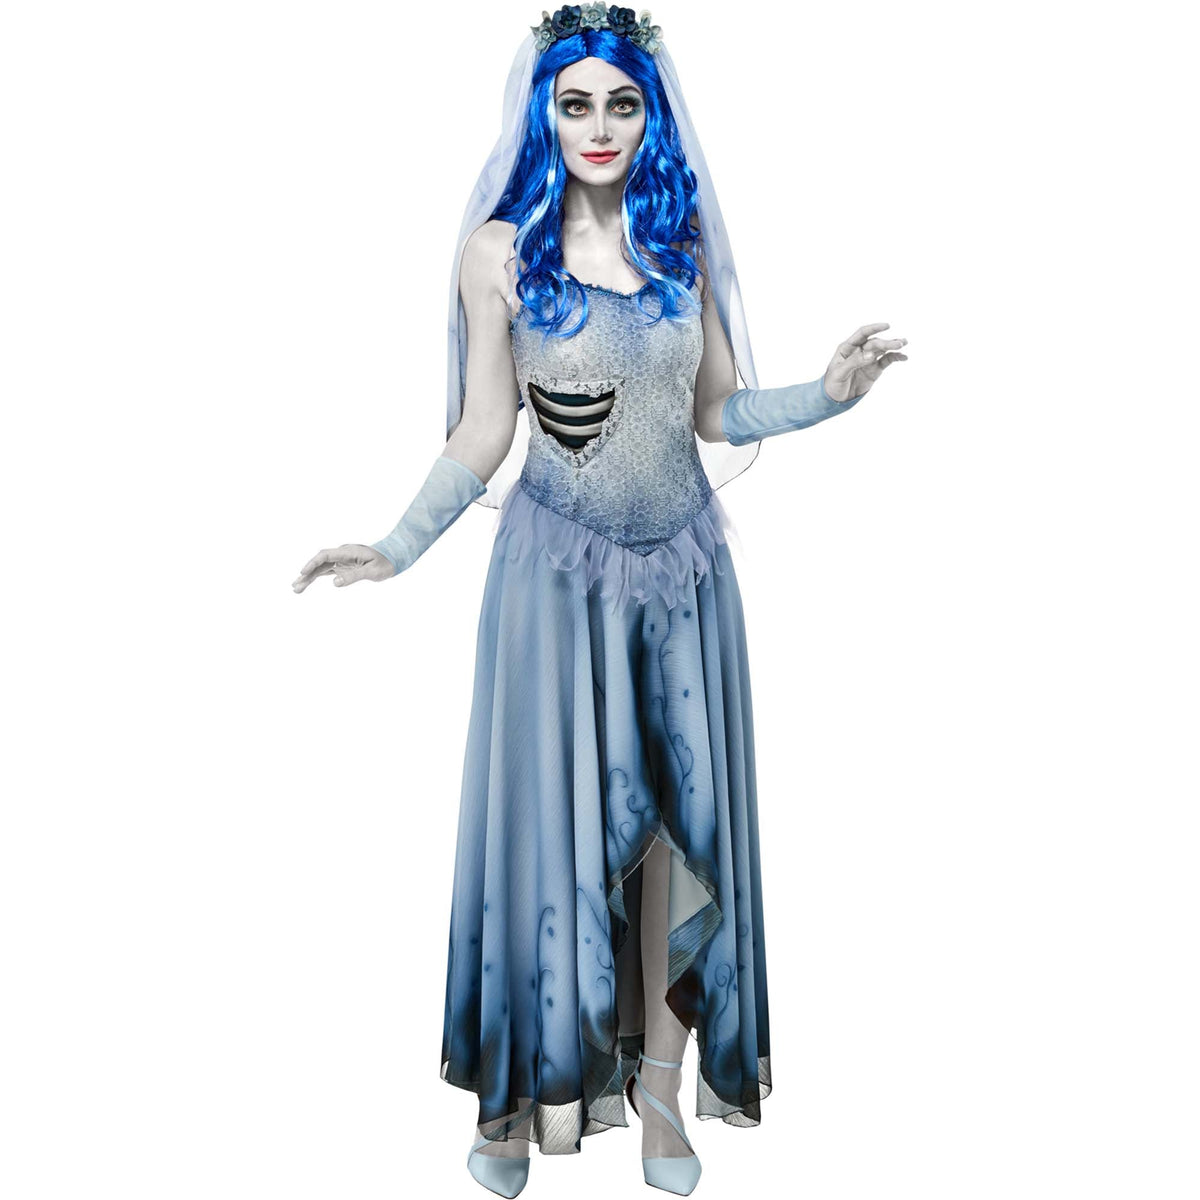 RUBIES II (Ruby Slipper Sales) Costumes Corpse Bride Costume for Adults, Blue Dress with Veil and Gauntlets